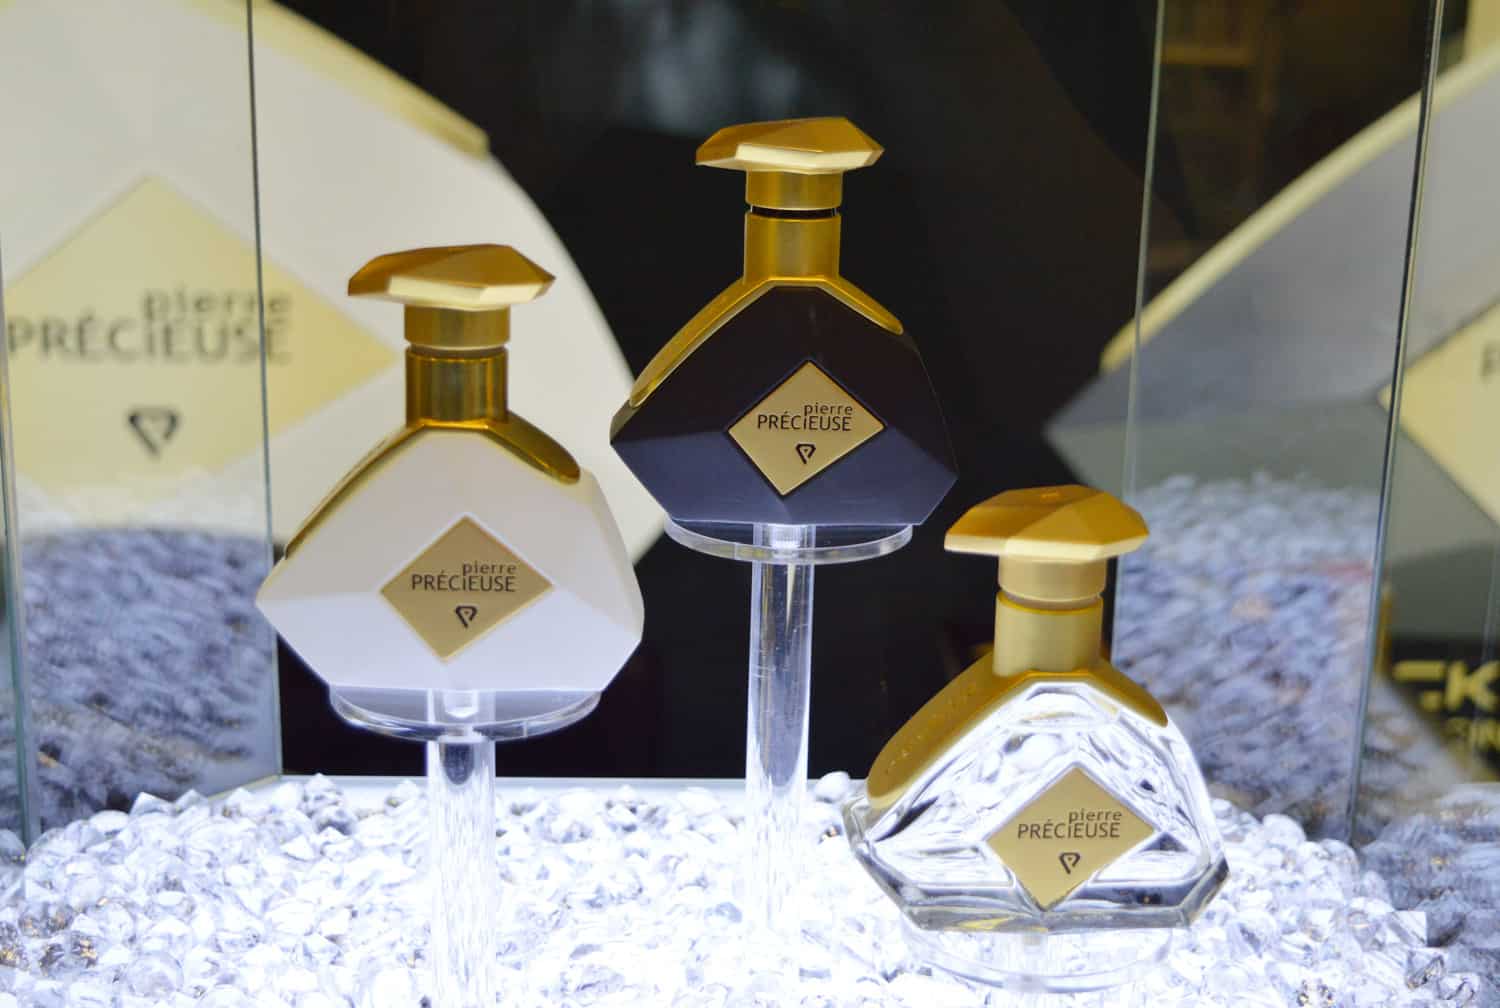 Merch Perfumes recently launched three new perfumes  from Pierre Precieuse Parfum,